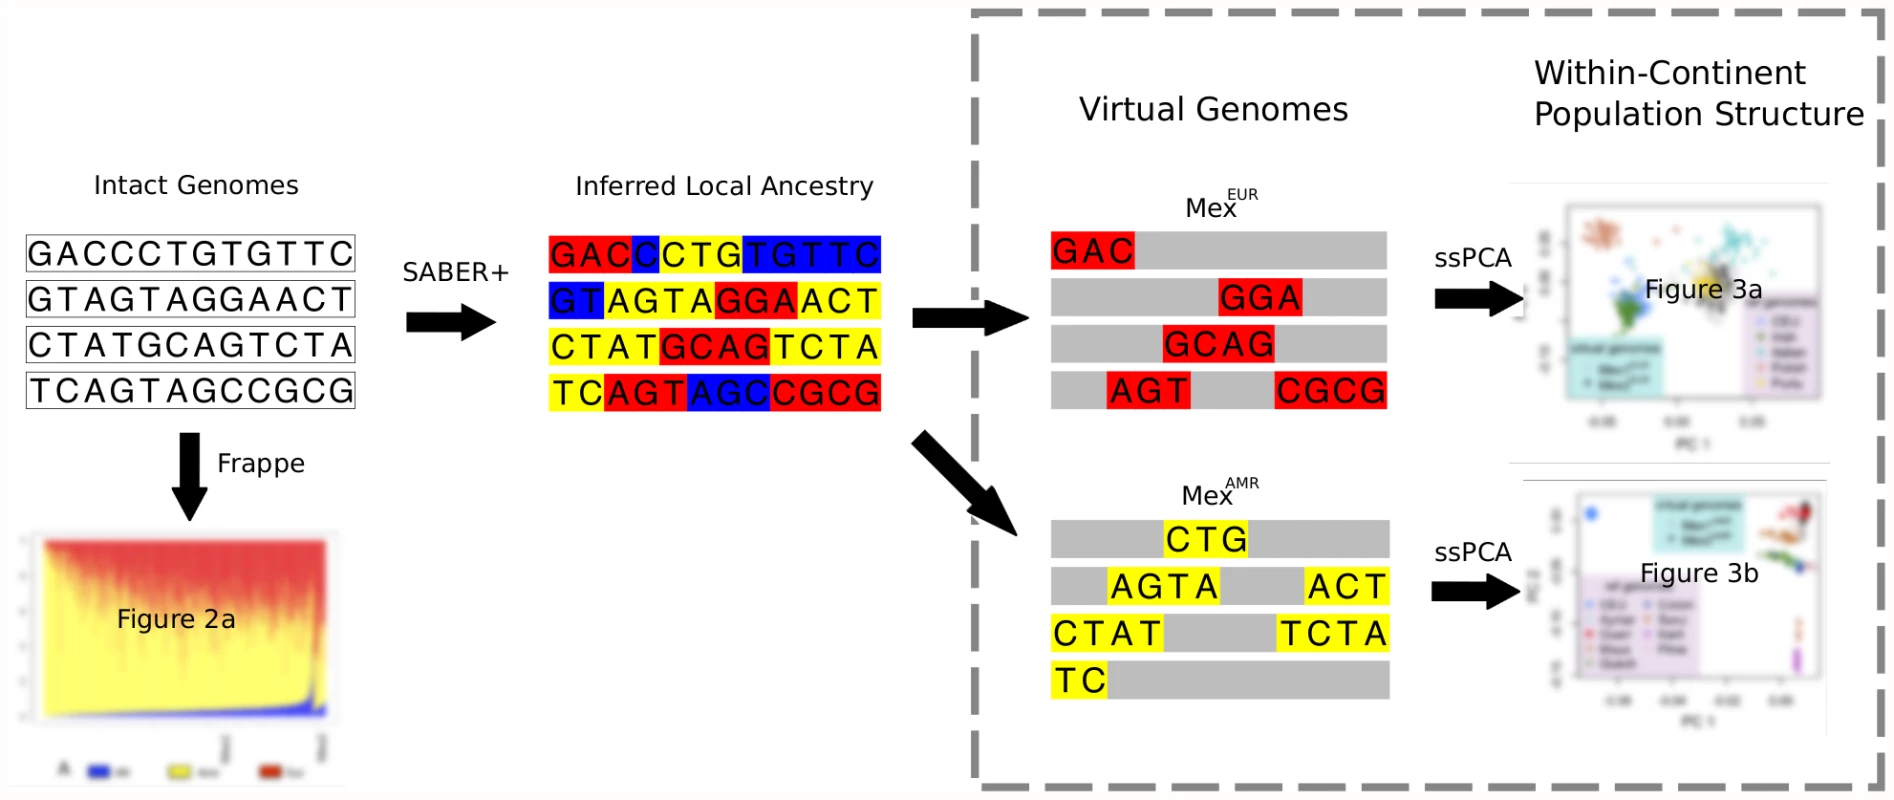 Schematic describing the analytic framework for characterizing continental-level and within-continent populations structure in an admixed population.